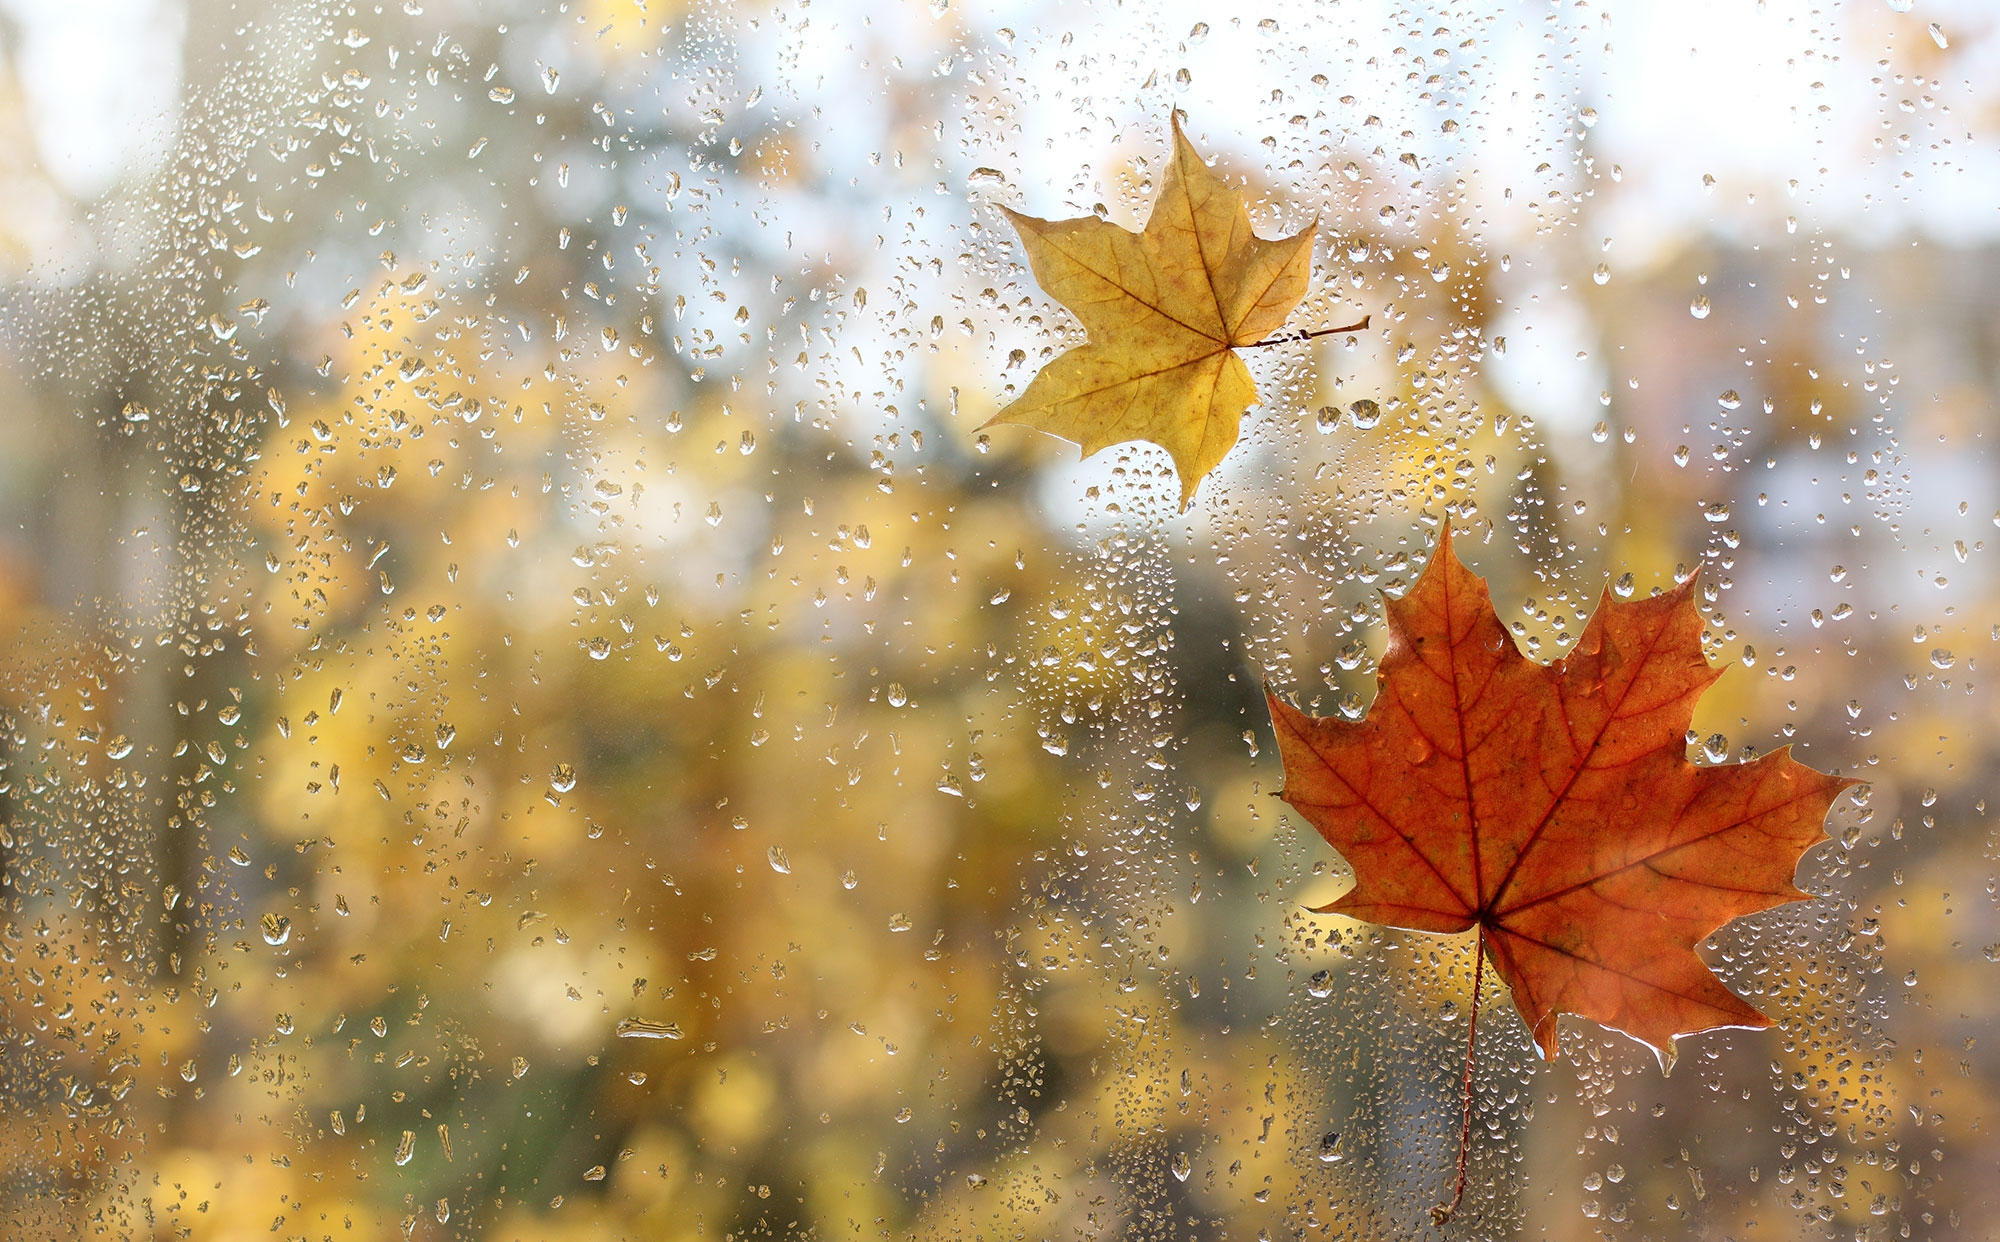 A window view of a rainy, fall day.